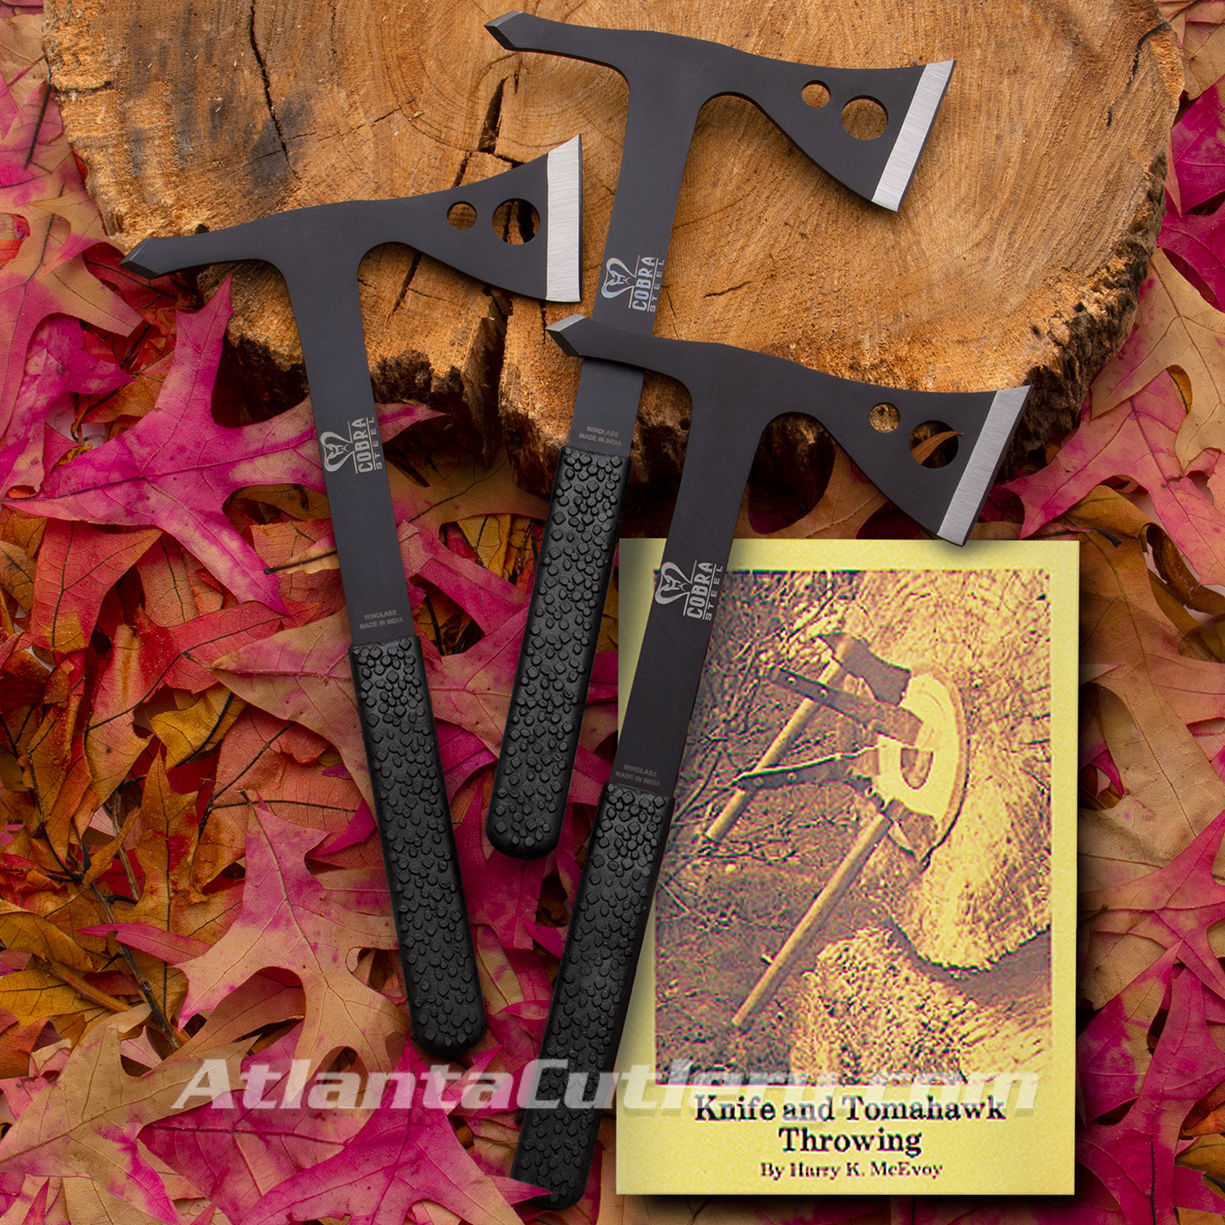 throwing axe kit includes set of 3 Cobra Steel throwing axes, a belt sheath and manual "Knife & Tomahawk Throwing" 